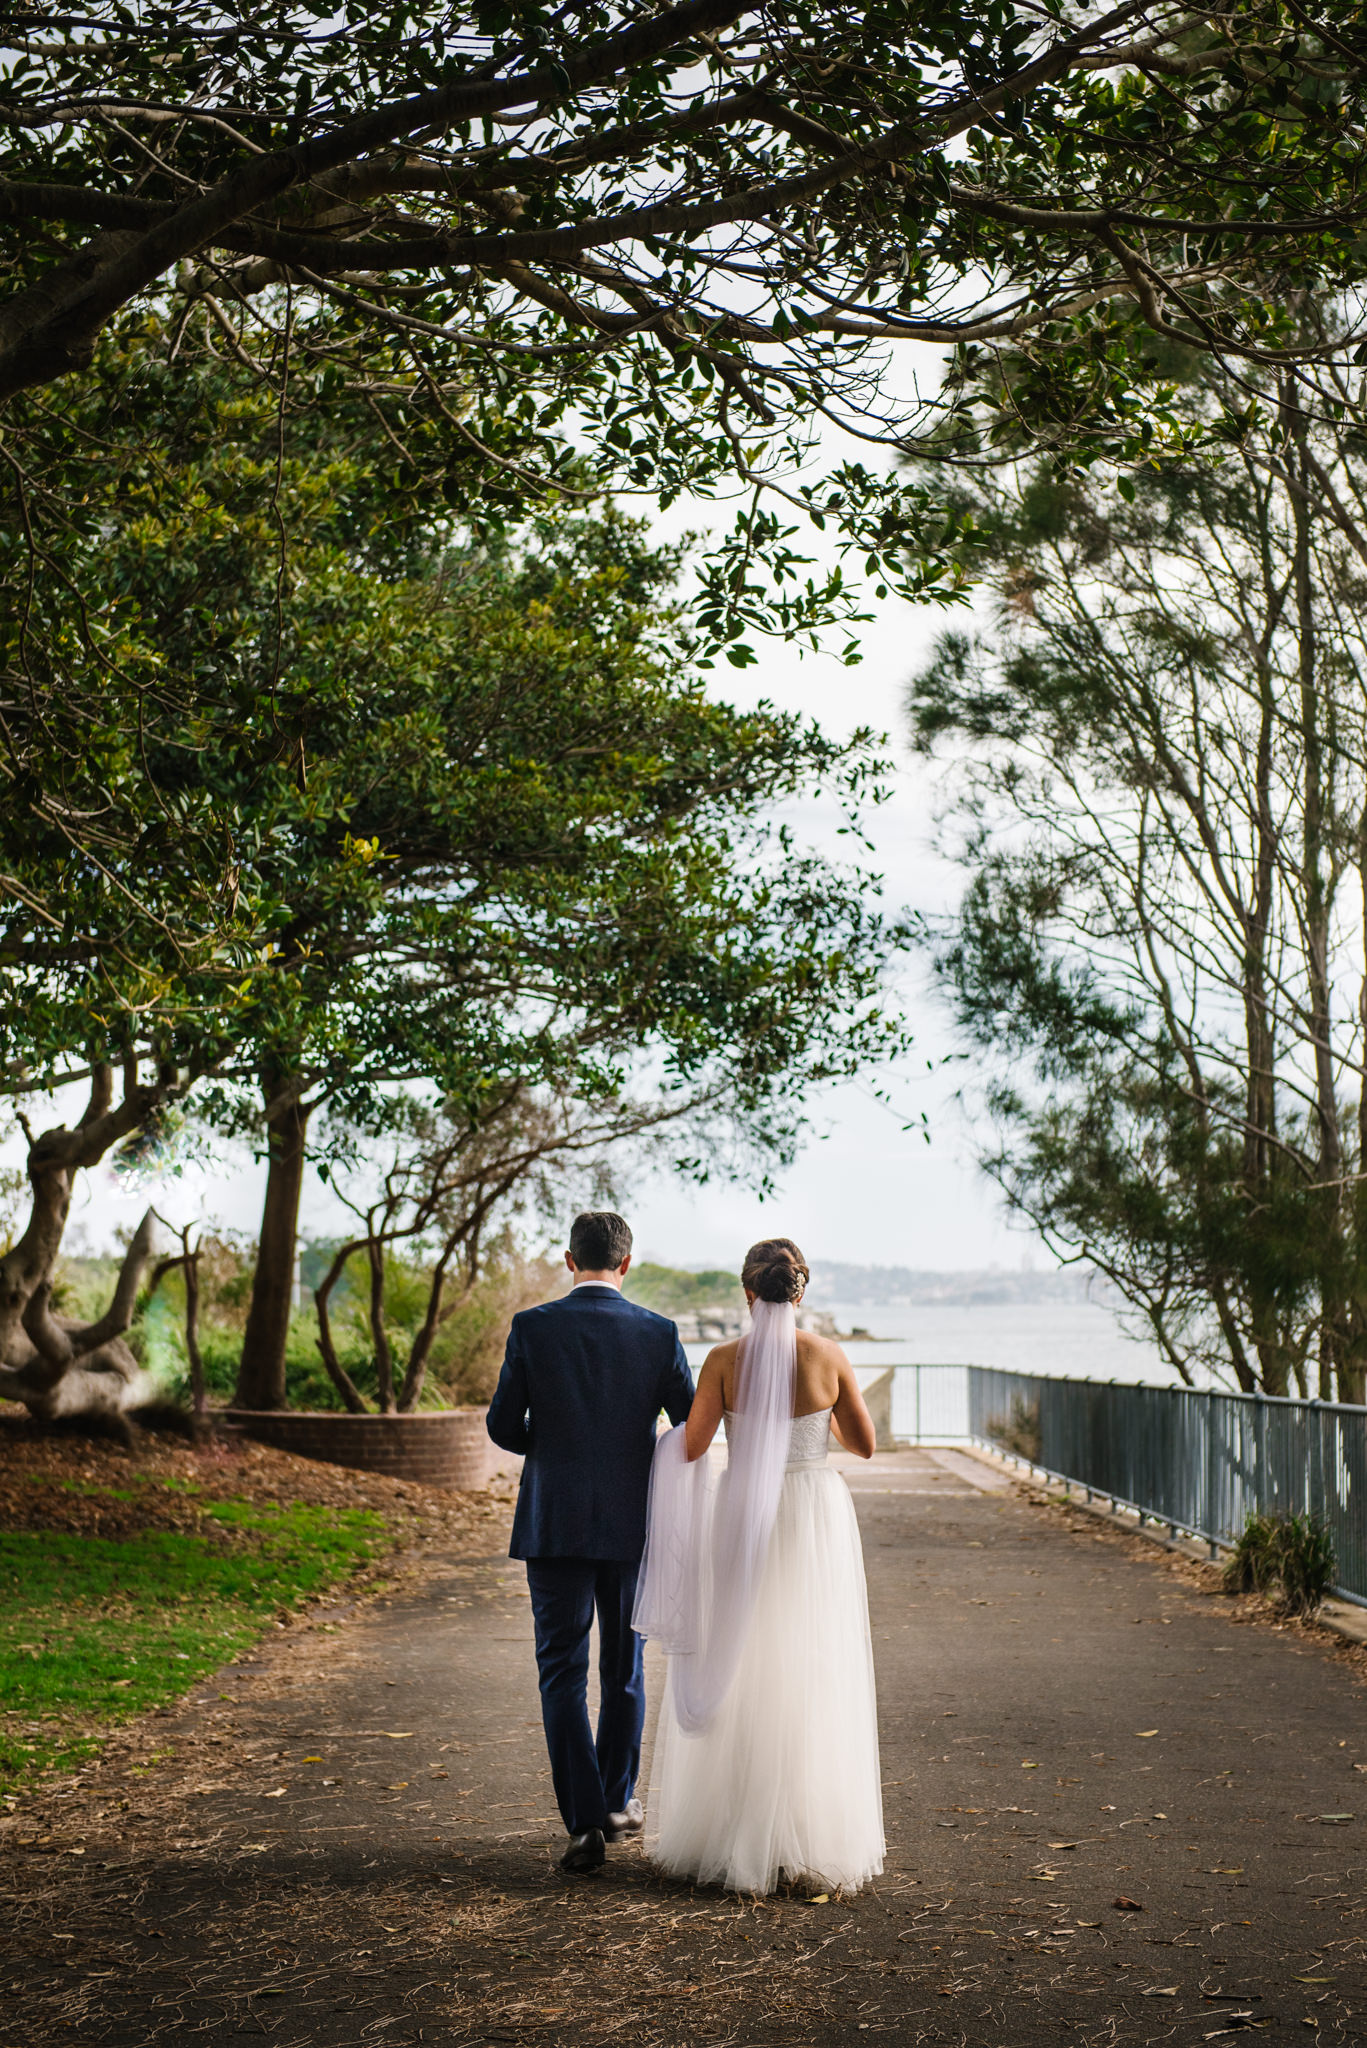 Bride and groom walking down aisle of trees at Little Manly